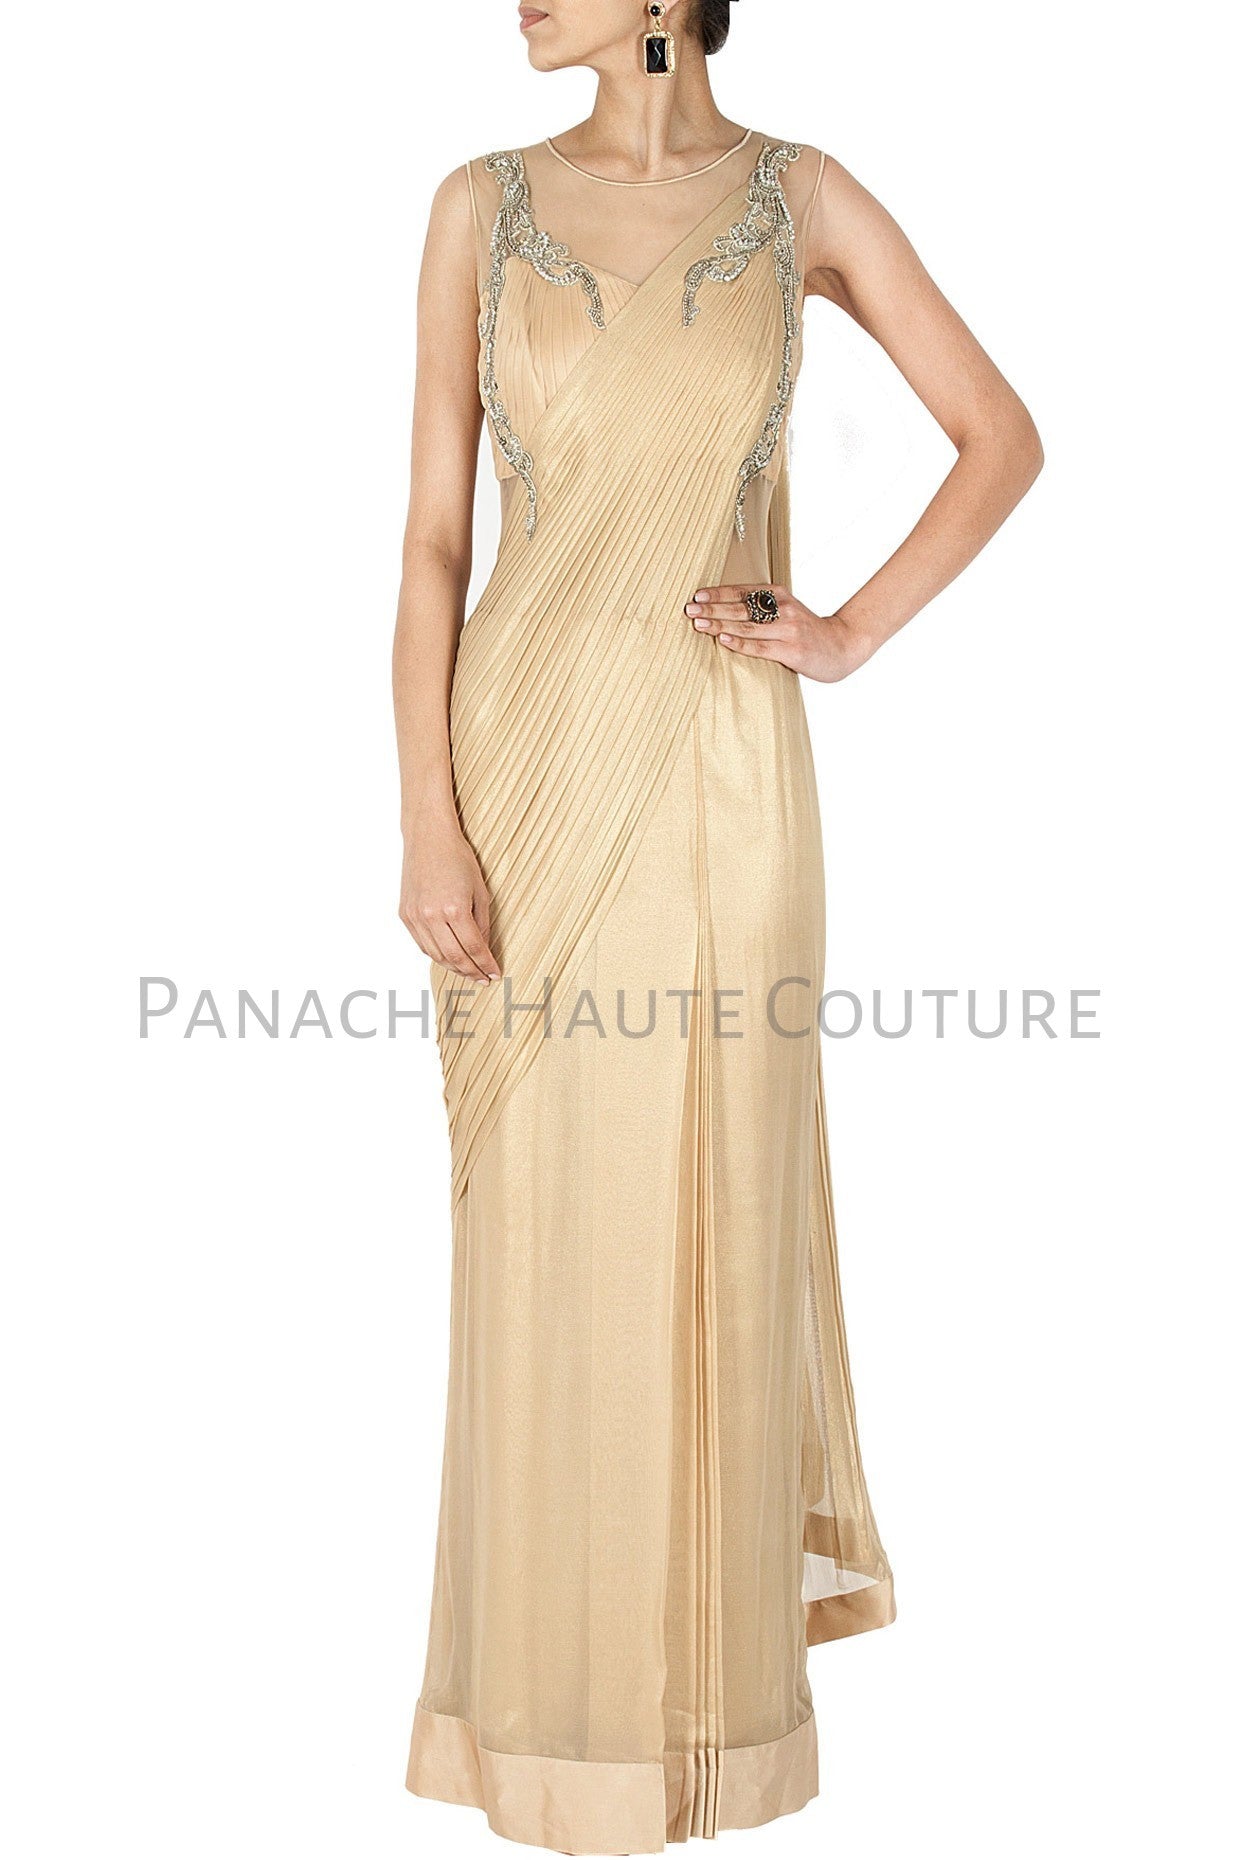 Buy now neige light beige saree gown with a feather-lined